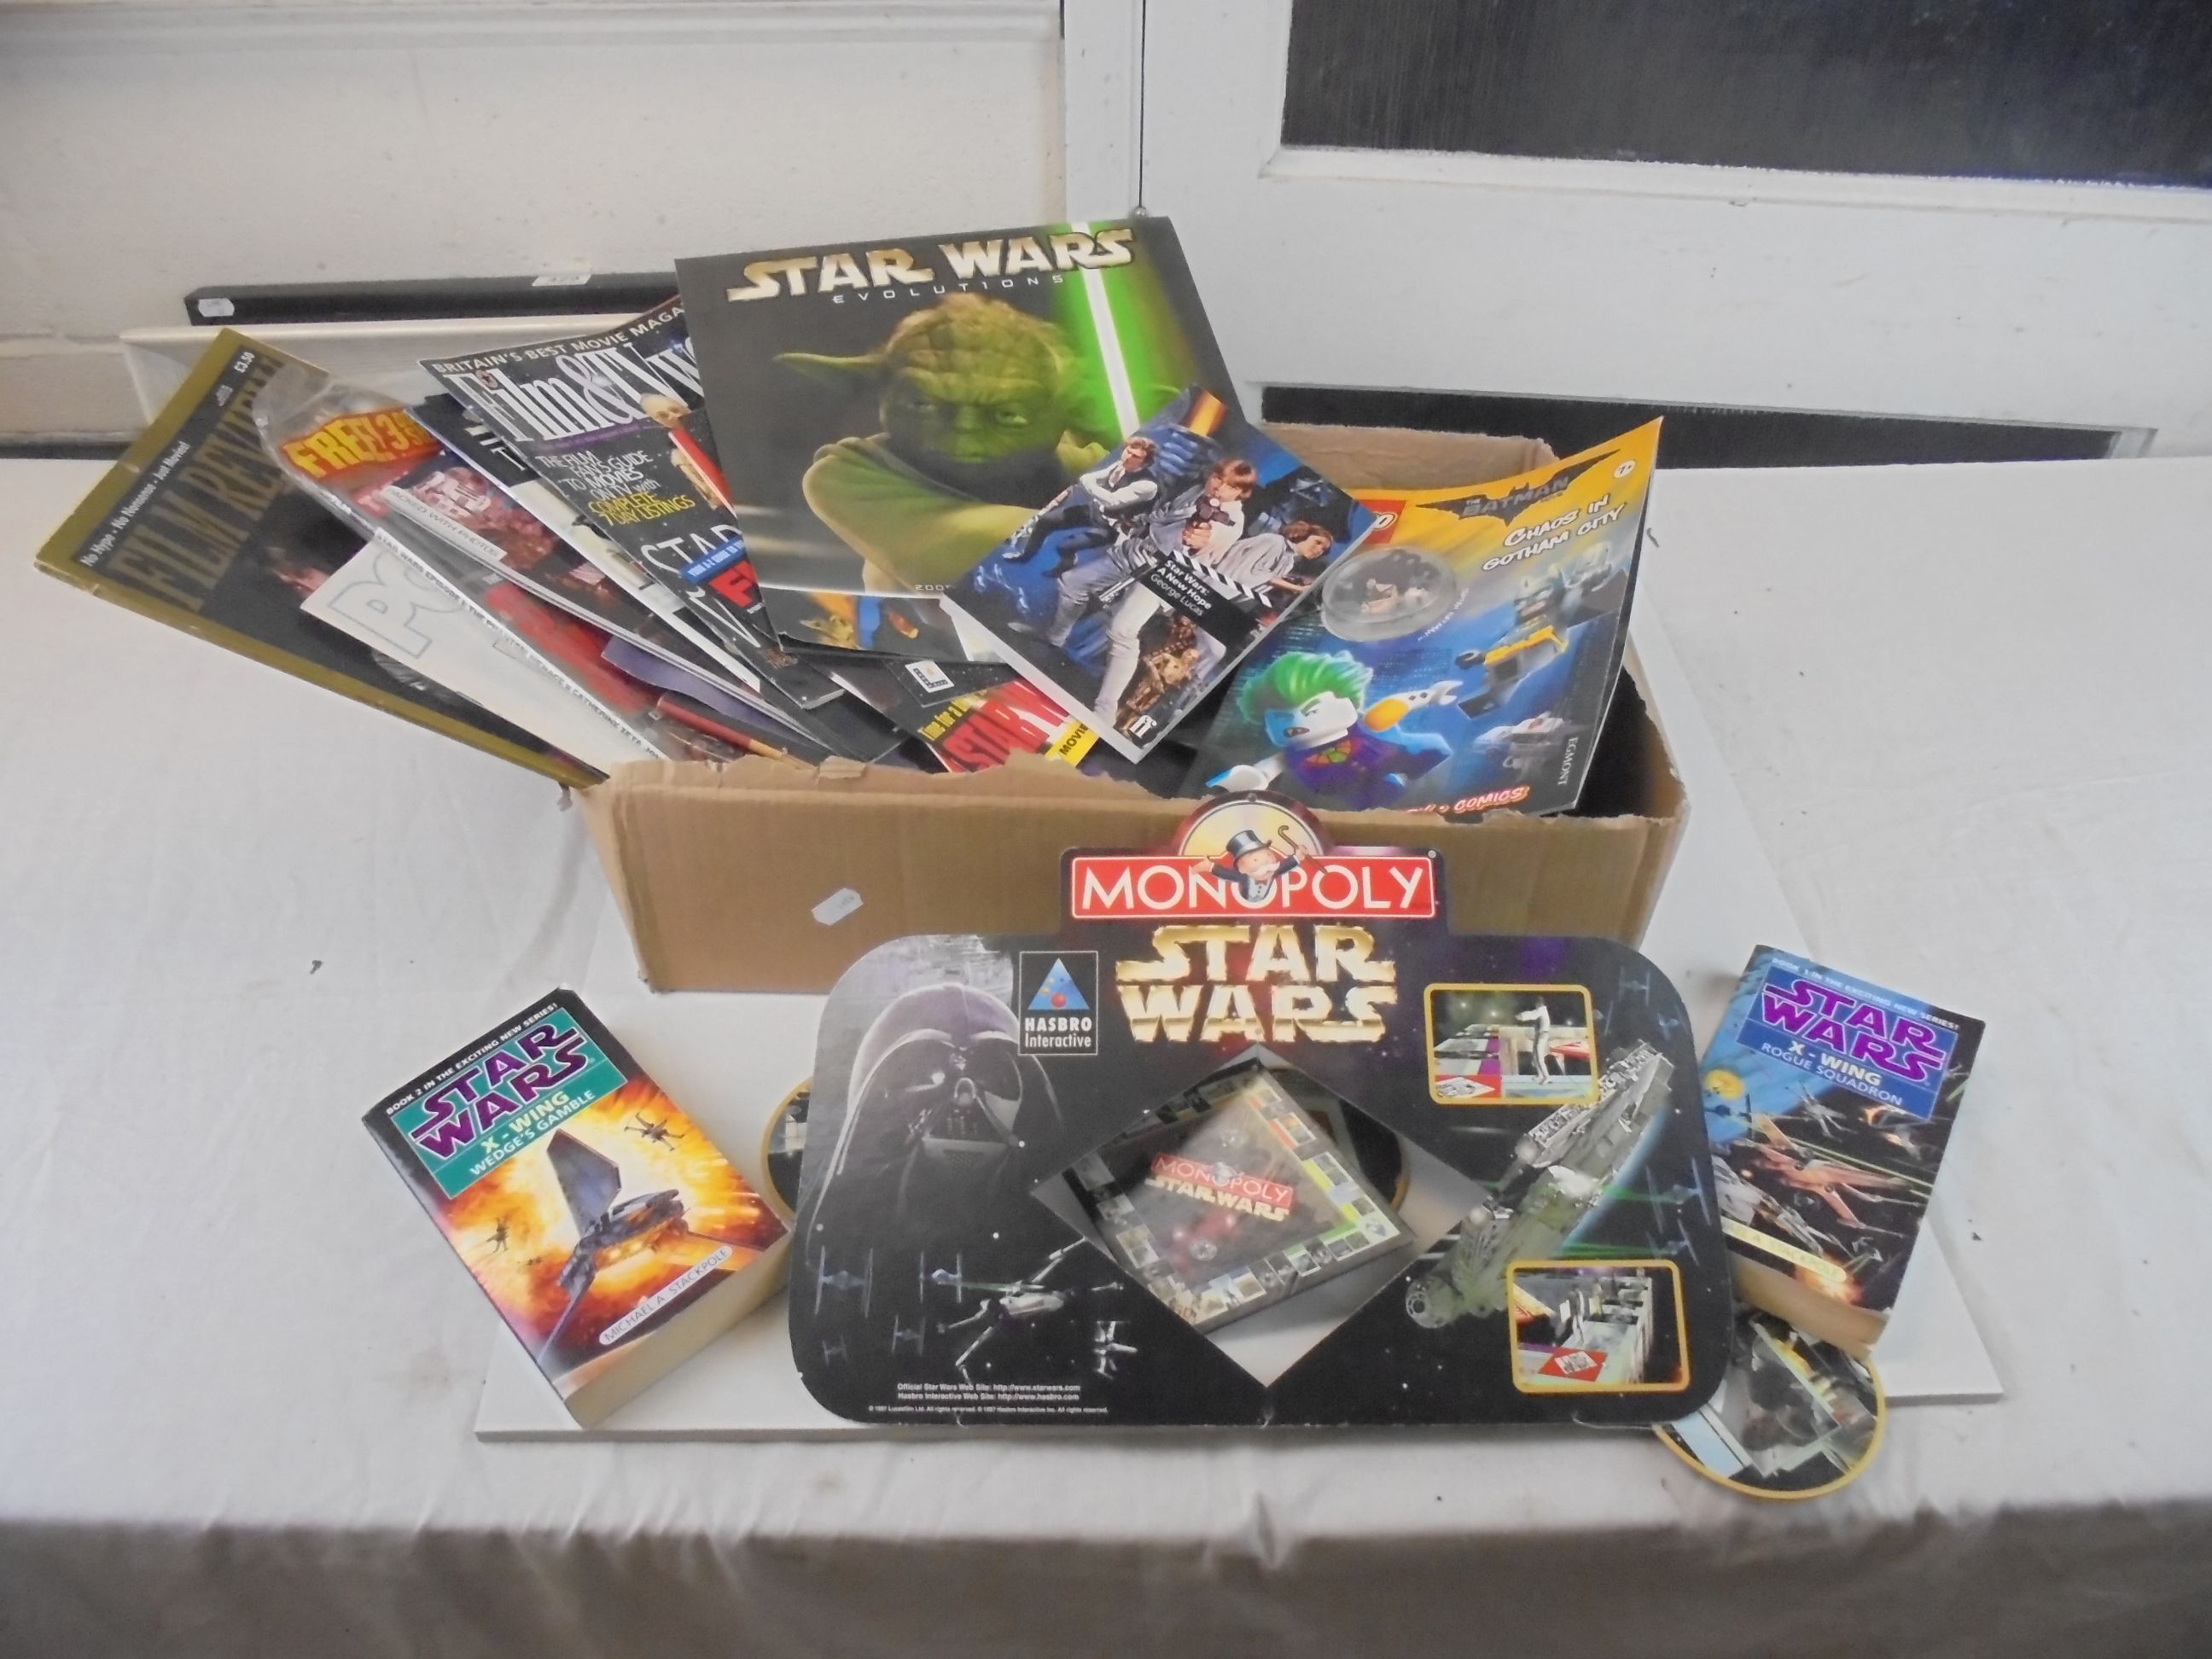 Star Wars - Collection of Various items including Books, Calendars, Magazines, Monoploy Cardboard